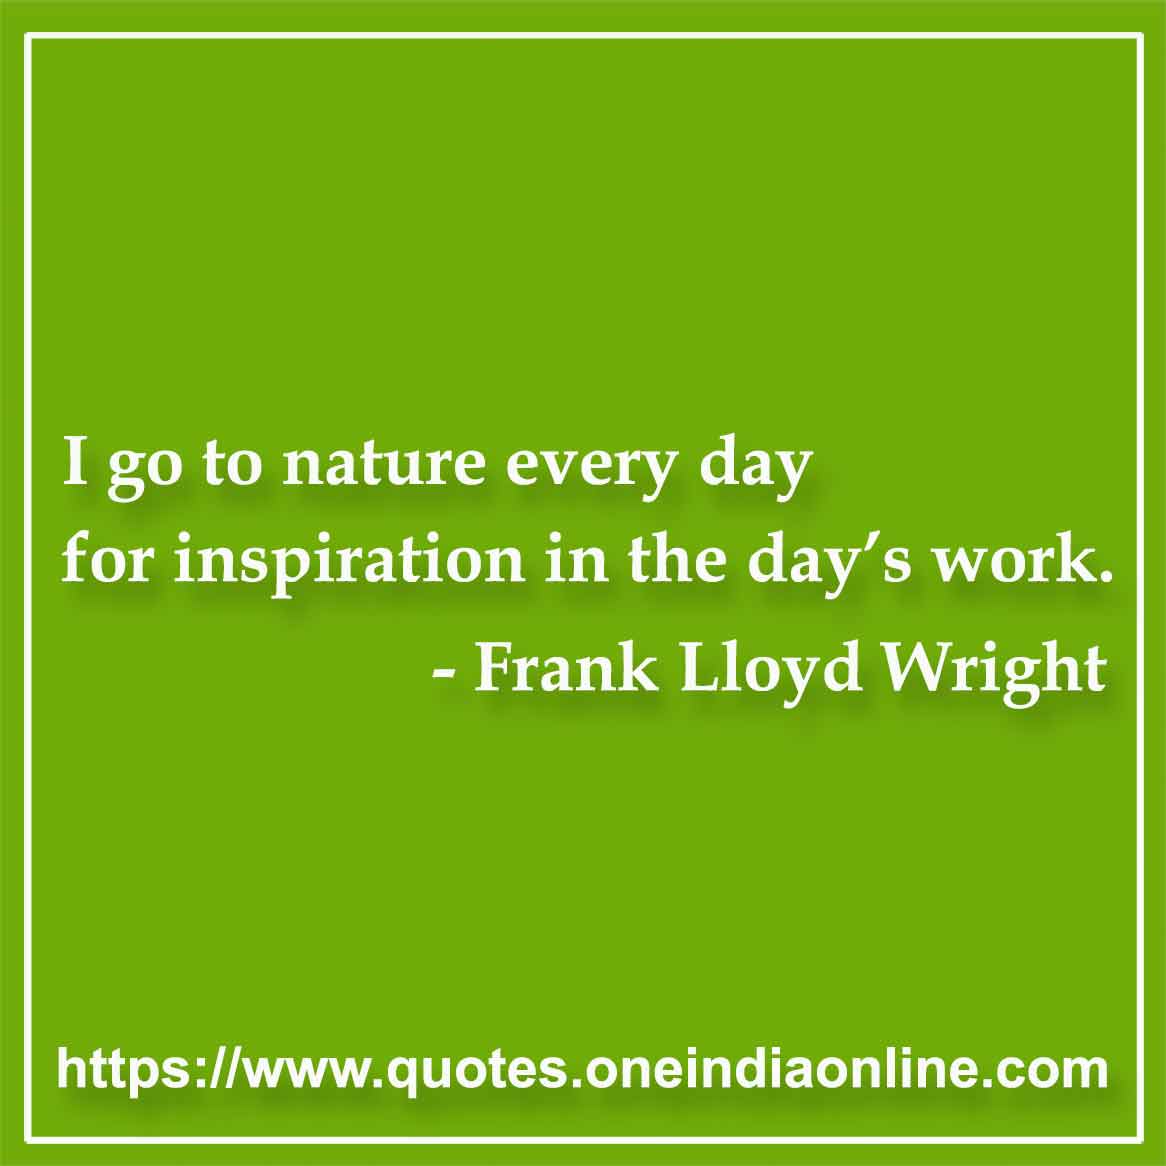 I go to nature every day for inspiration in the day’s work. 

- Best  by Frank Lloyd Wright